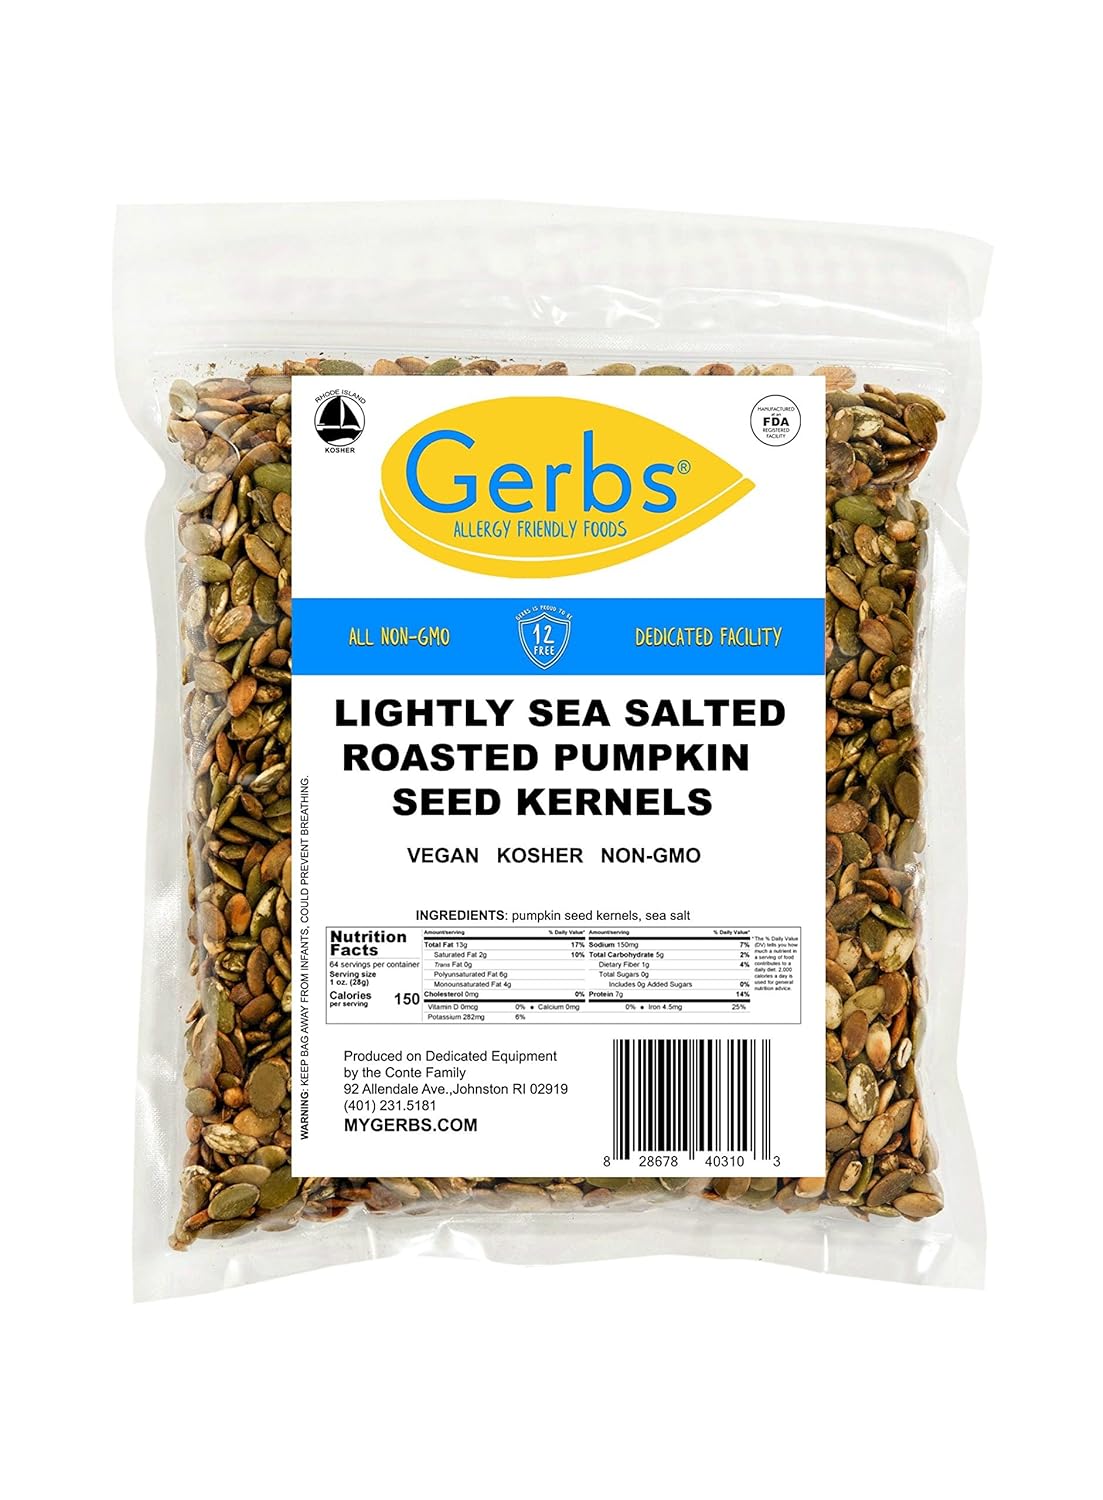 Lightly Sea Salted Pumpkin Seed Kernels by Gerbs - 4 LBS - Top 11 Food Allergen Free & Non GMO - Premium Dry Roasted Shelled Pepitas – COG Mexico